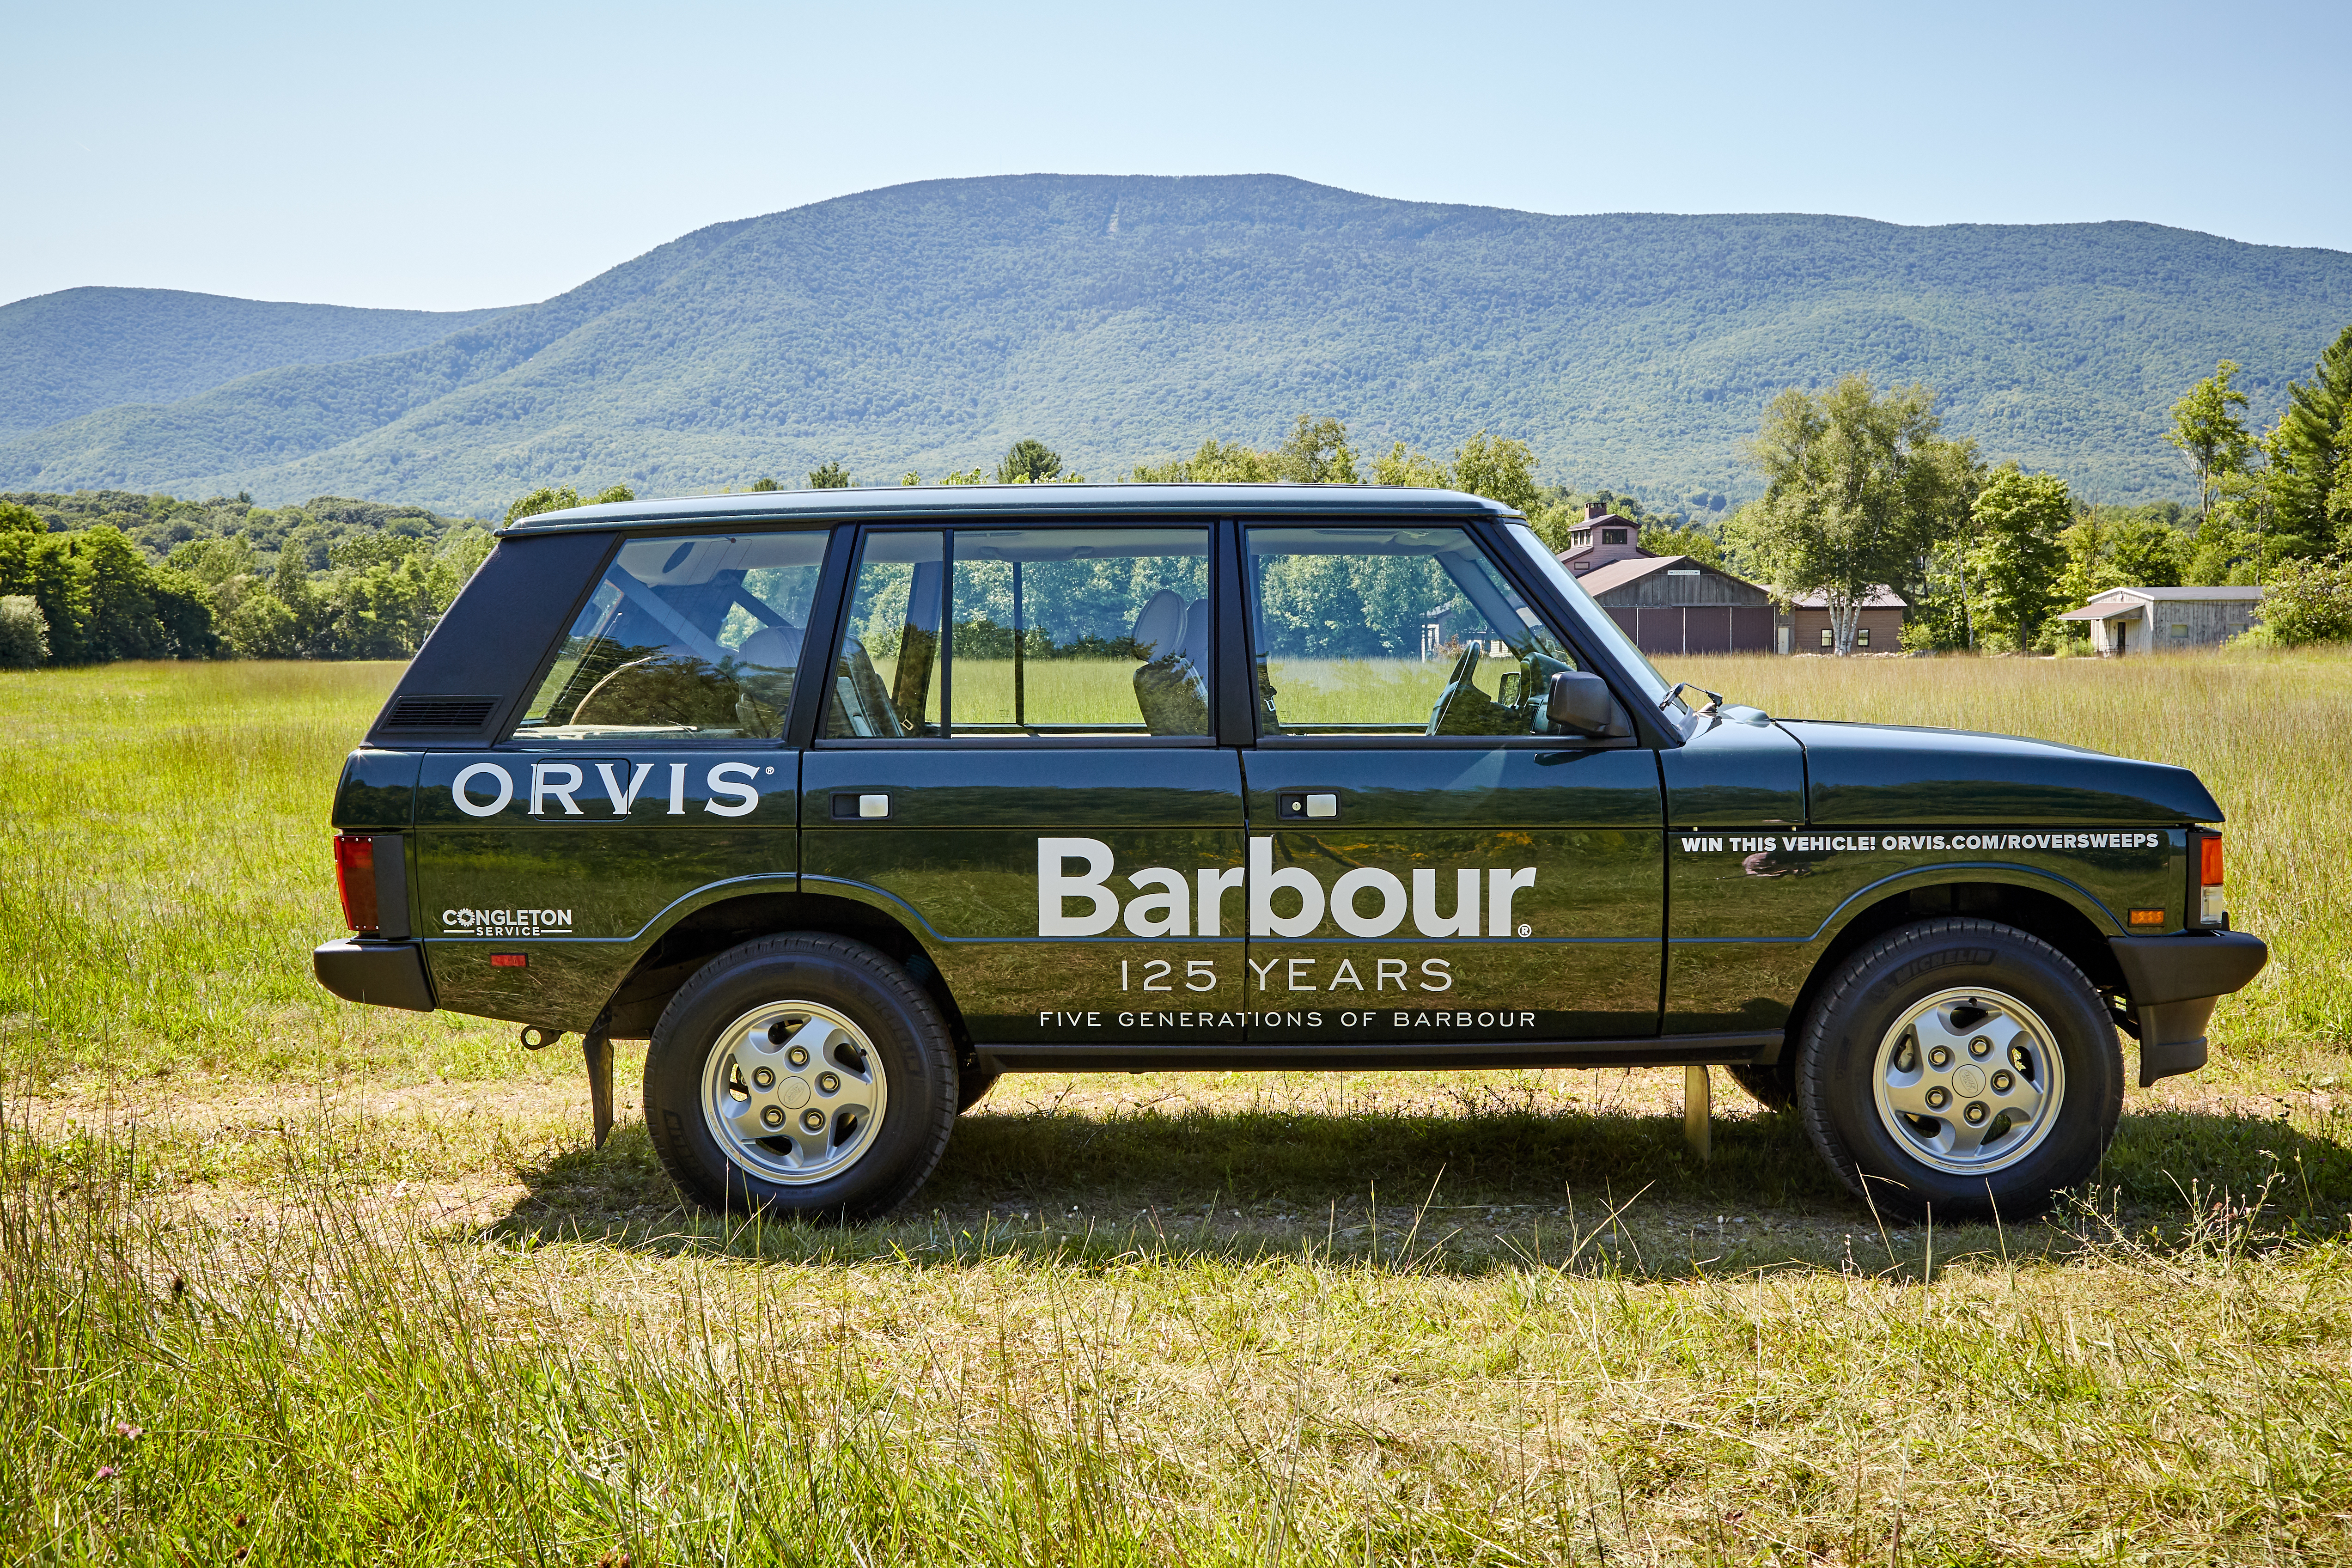 Barbour And Orvis Team Up For The Vintage Range Rover Of